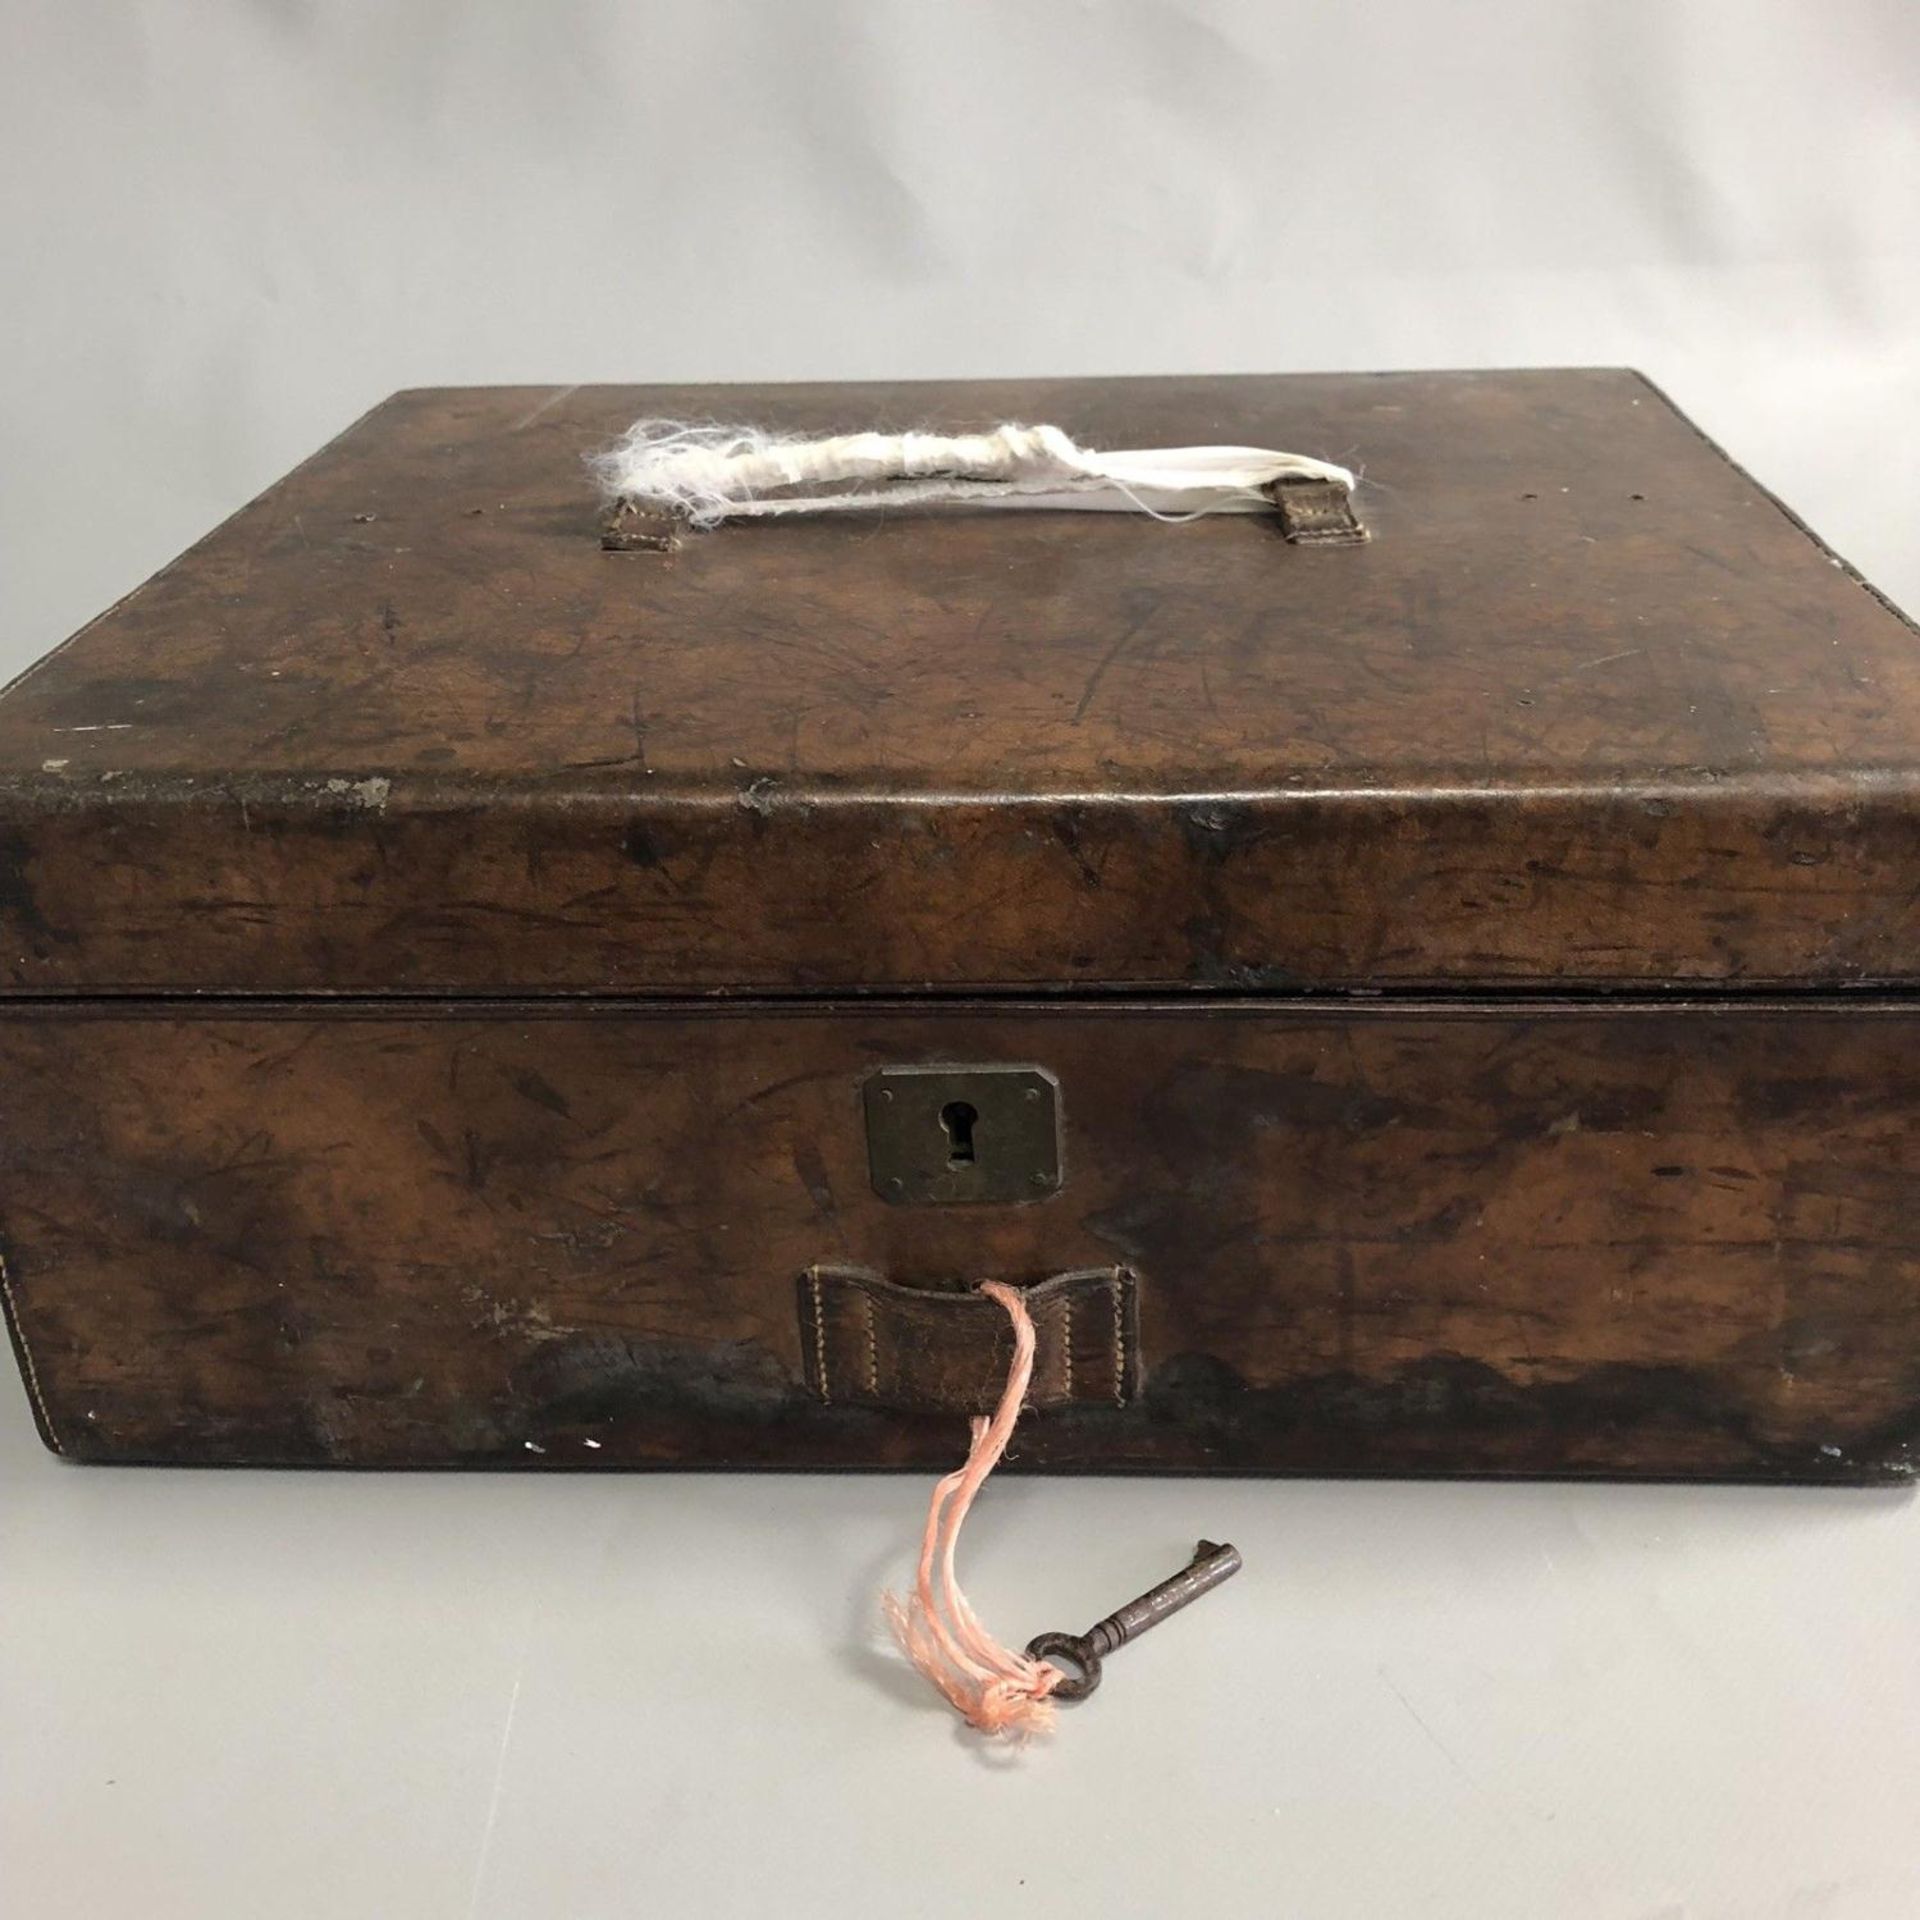 Antique Leather Bound Wooden Box with Original Key - Travelling Vanity Case ? - Image 4 of 6